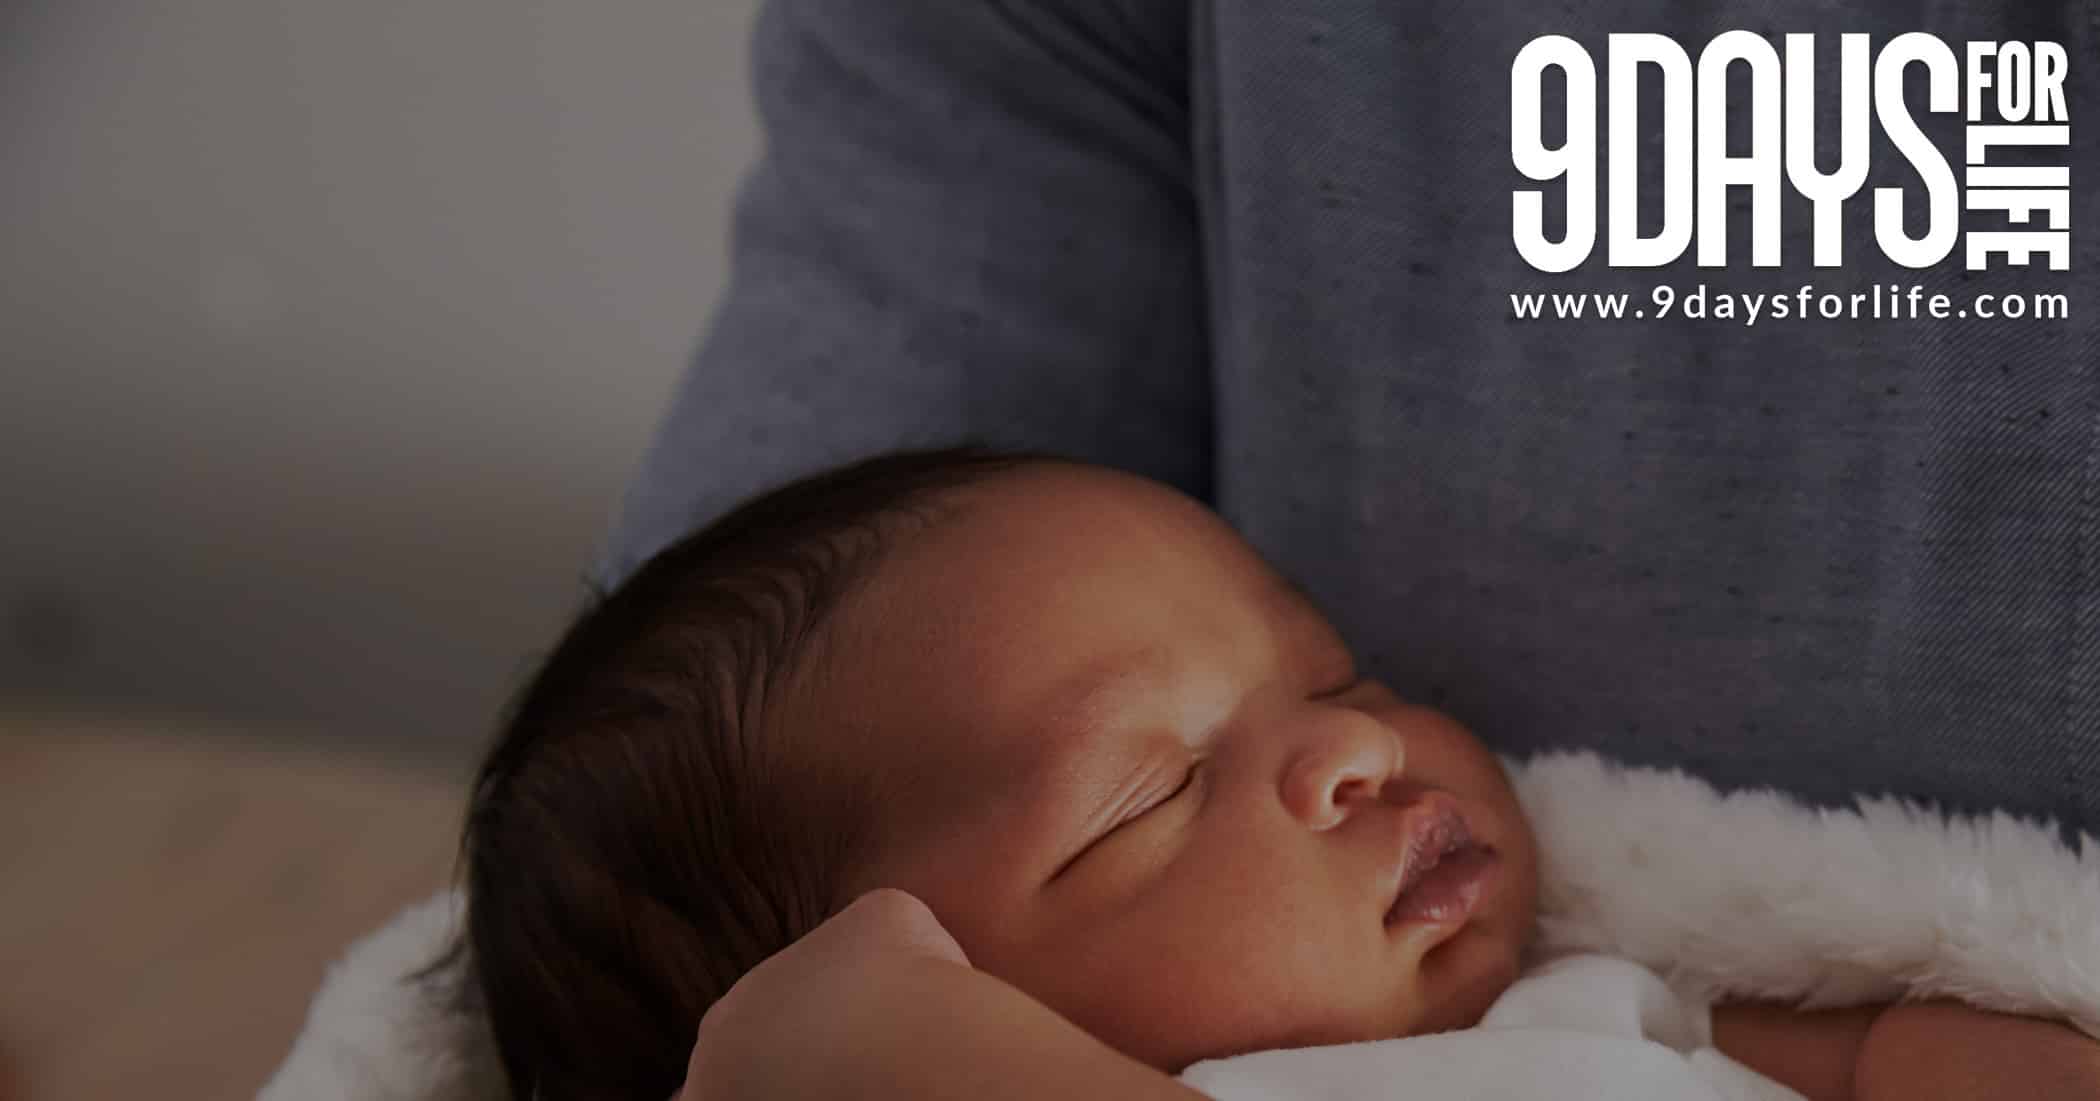 USCCB '9 DAYS FOR LIFE' CAMPAIGN